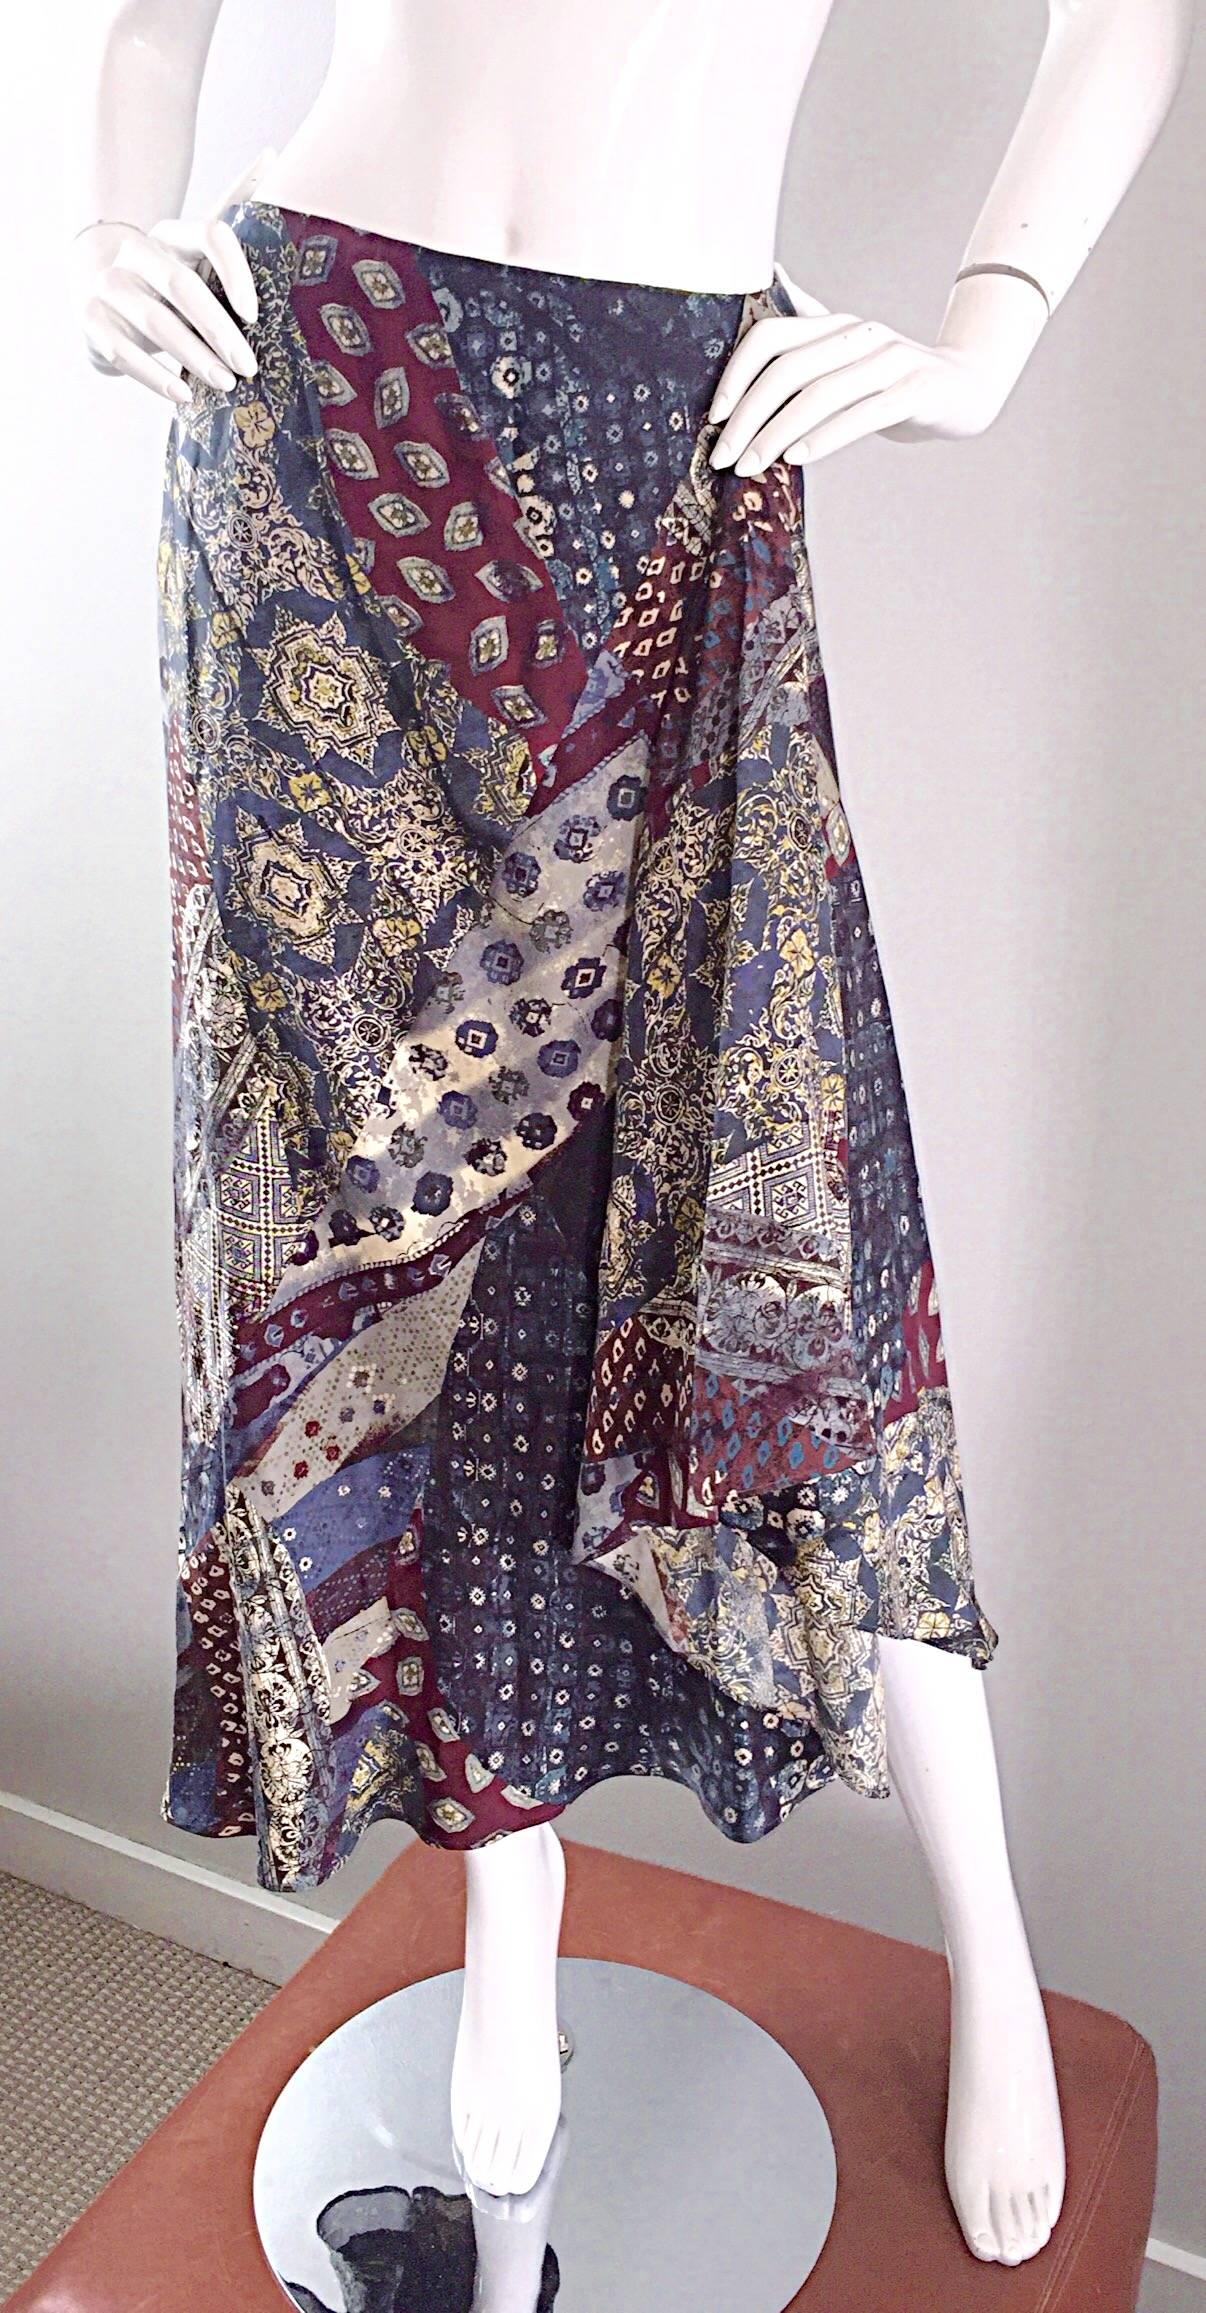 Incredible vintage KENZO 1970s silk boho asymmetrical skirt! Features allover paisley prints in warm hues of blue, burgundy and Ivory. Asymmetrical on one side. The patterns and colors of this gem make for the perfect bohemian vibe! Hidden zipper up